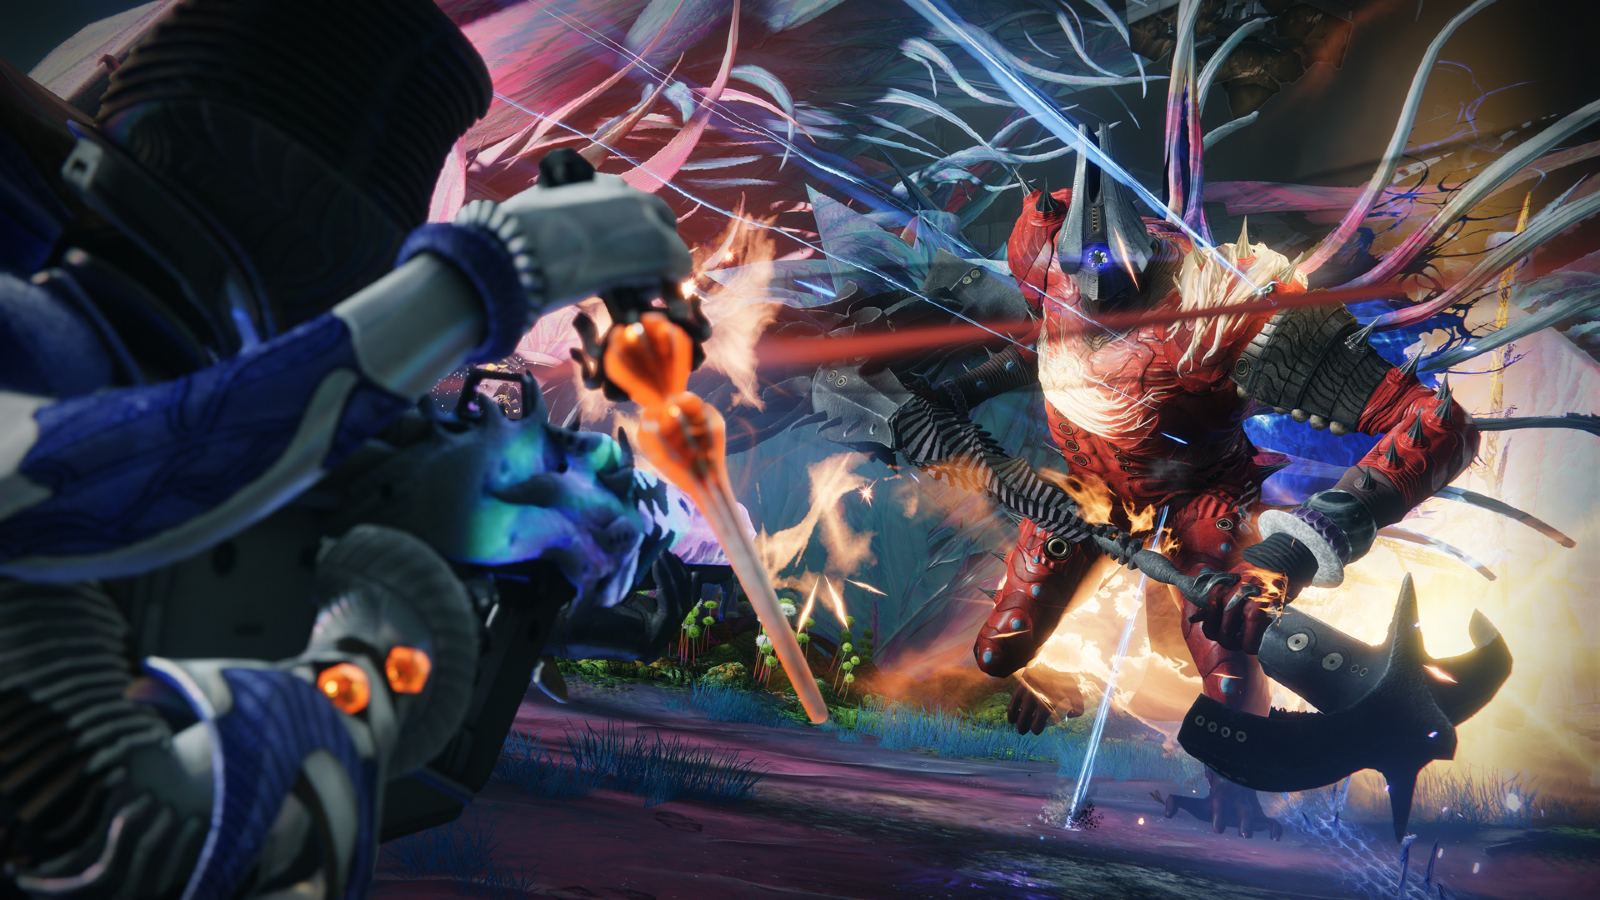 Destiny 2 players sweep Root of Nightmares with mass clears and flawless runs – Dexerto